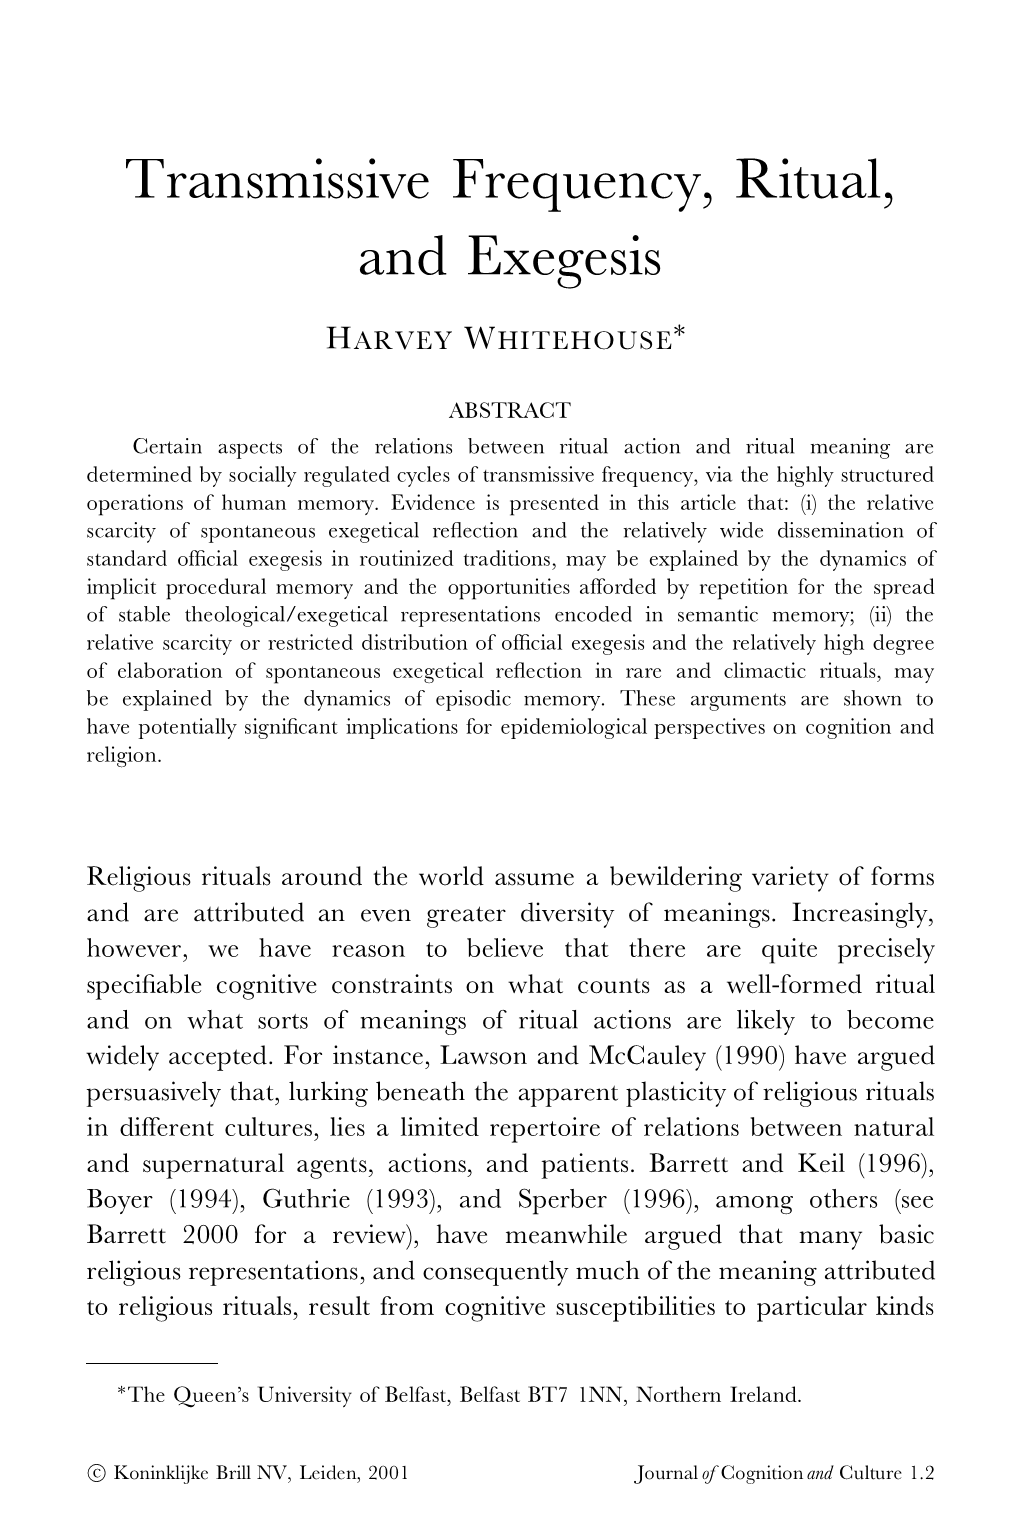 Transmissive Frequency, Ritual, and Exegesis